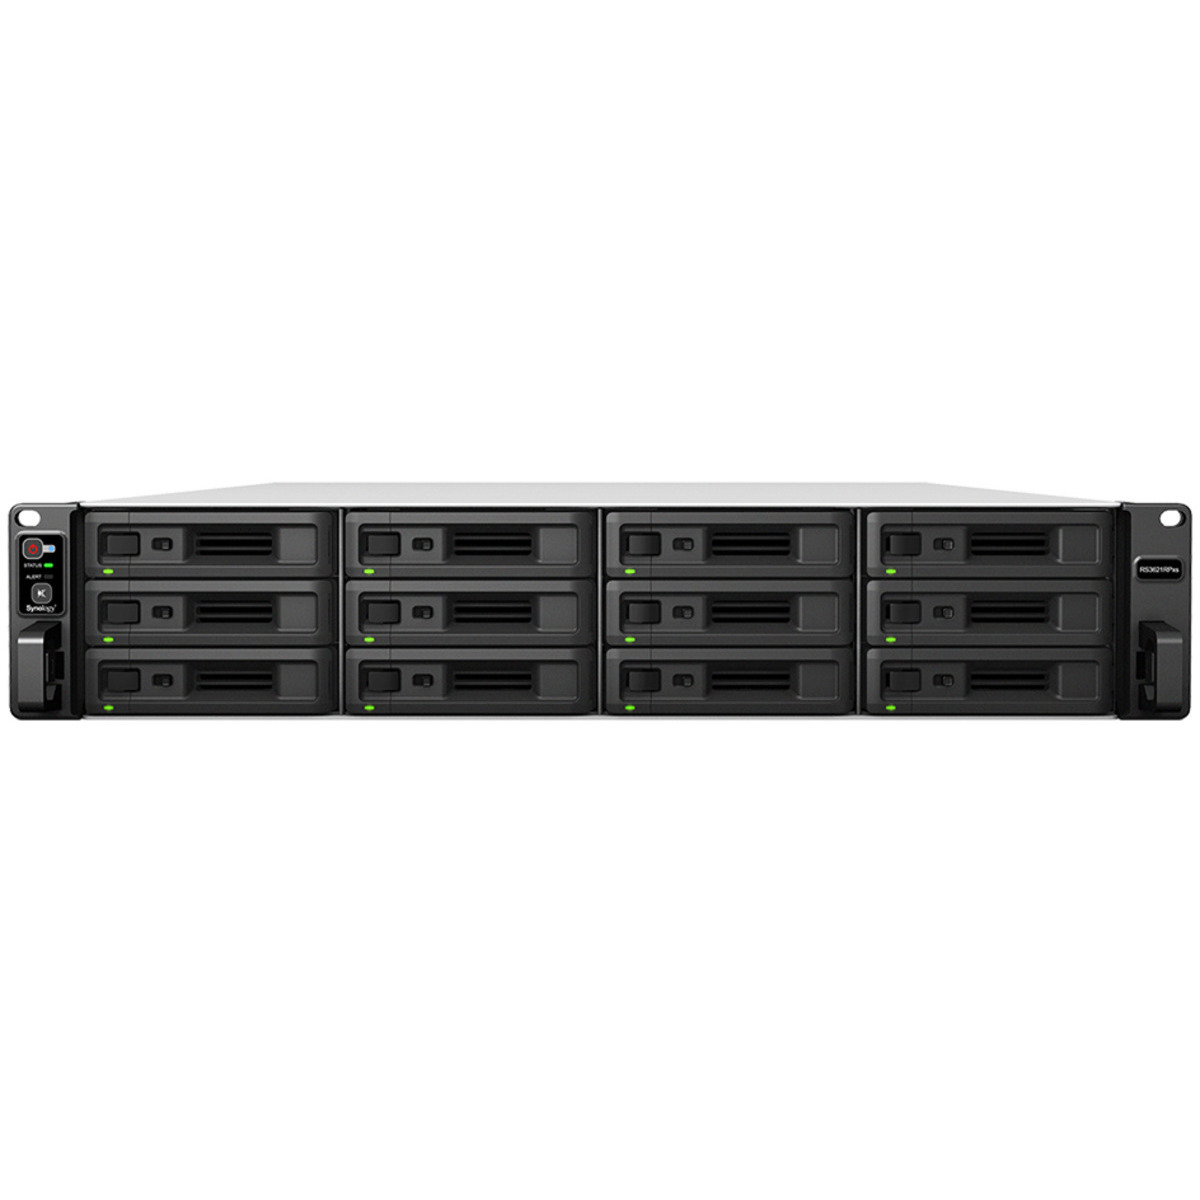 Synology RackStation RS3621RPxs 192tb 12-Bay RackMount Large Business / Enterprise NAS - Network Attached Storage Device 8x24tb Western Digital Ultrastar HC580 WUH722424ALE6L4 3.5 7200rpm SATA 6Gb/s HDD ENTERPRISE Class Drives Installed - Burn-In Tested RackStation RS3621RPxs